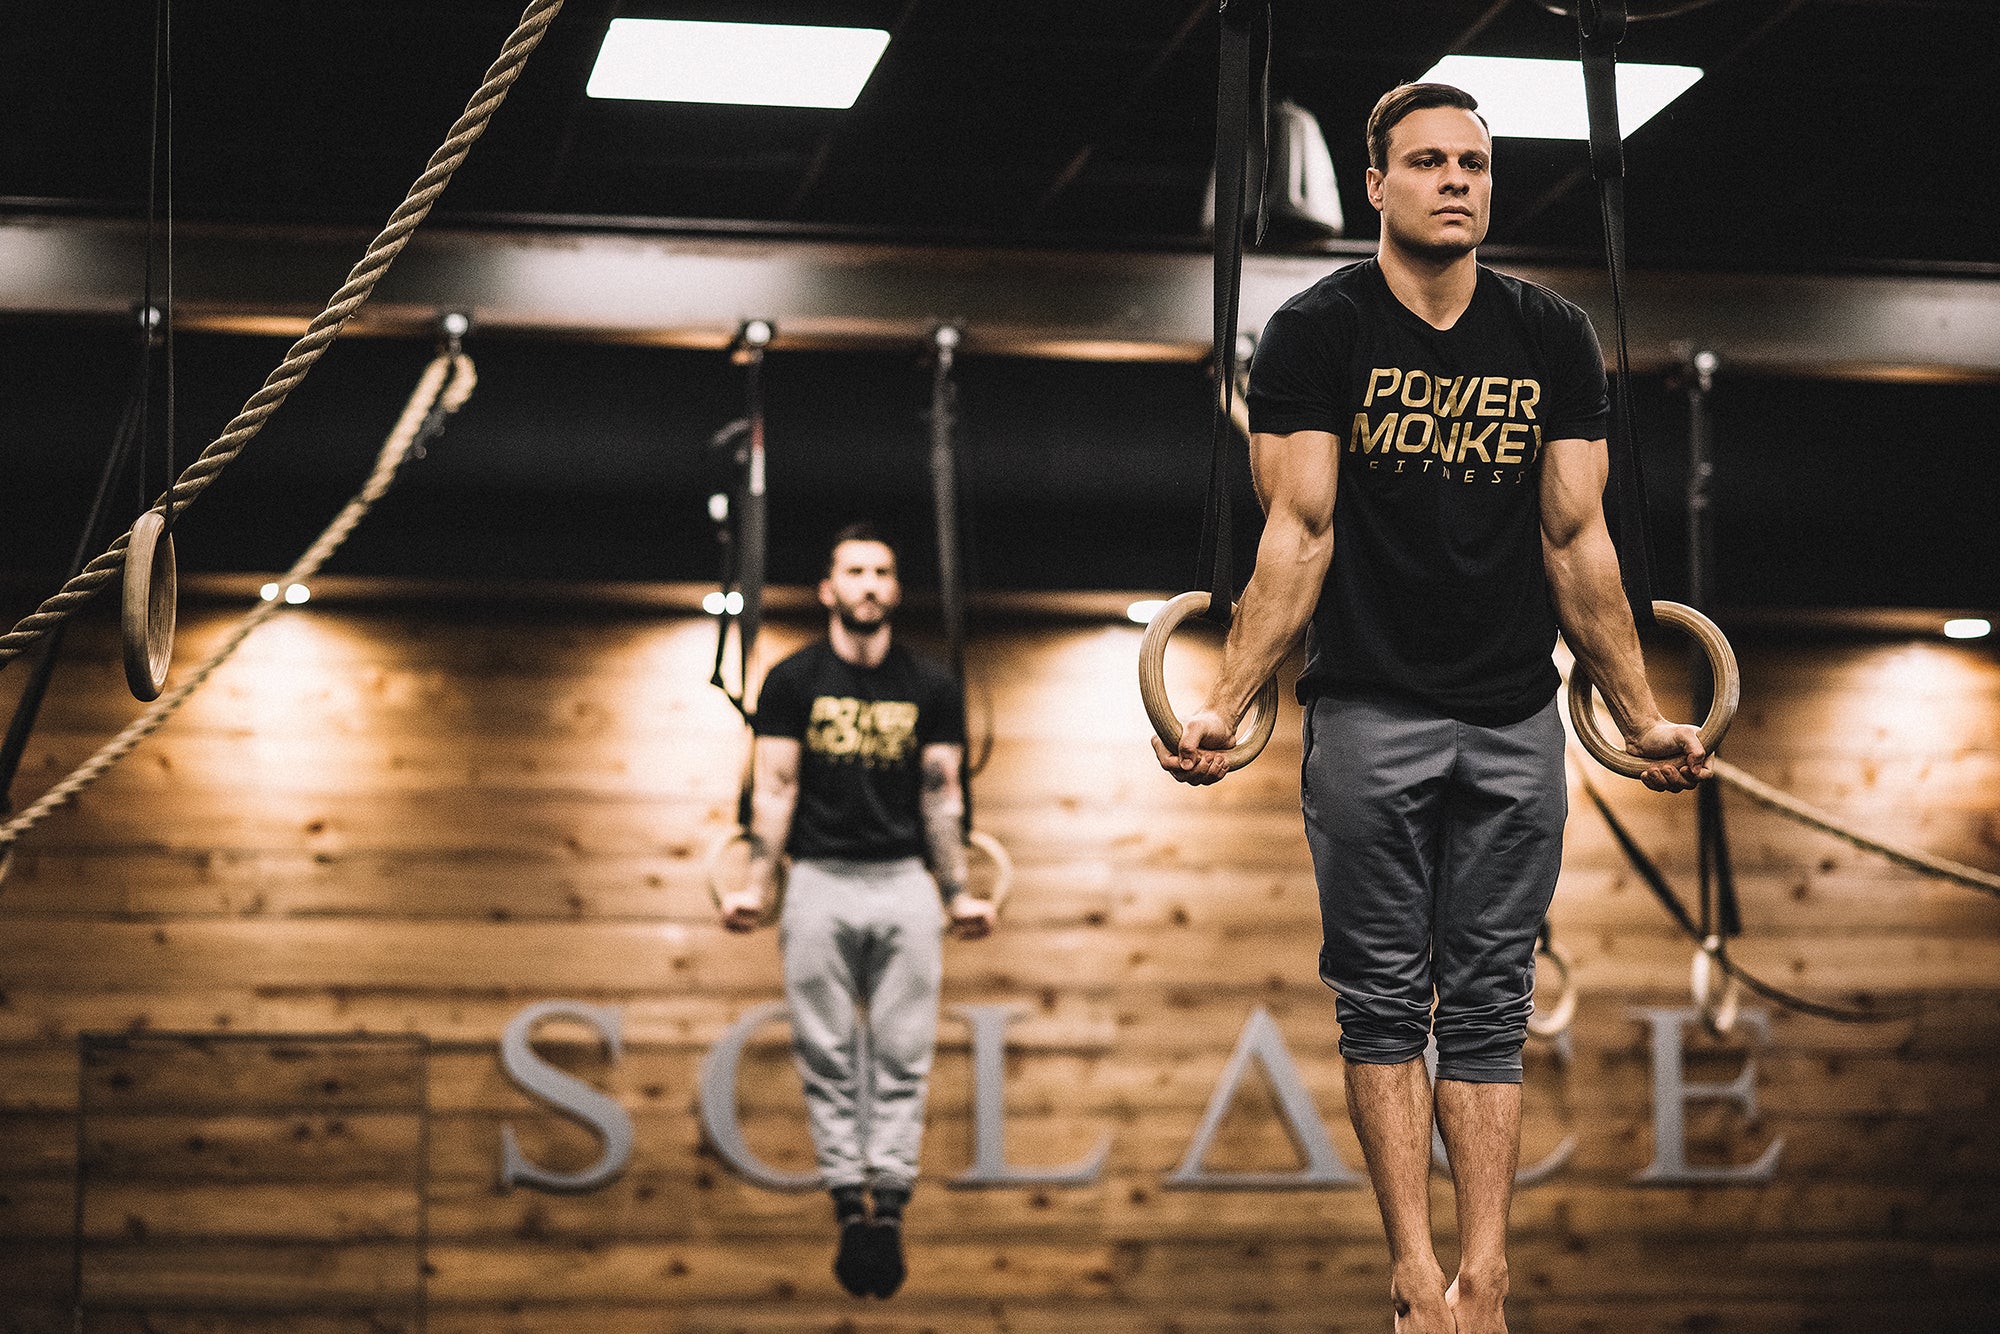 Photo of Dave Durante and Colin Geraghty performing a ring muscle up in a gym.